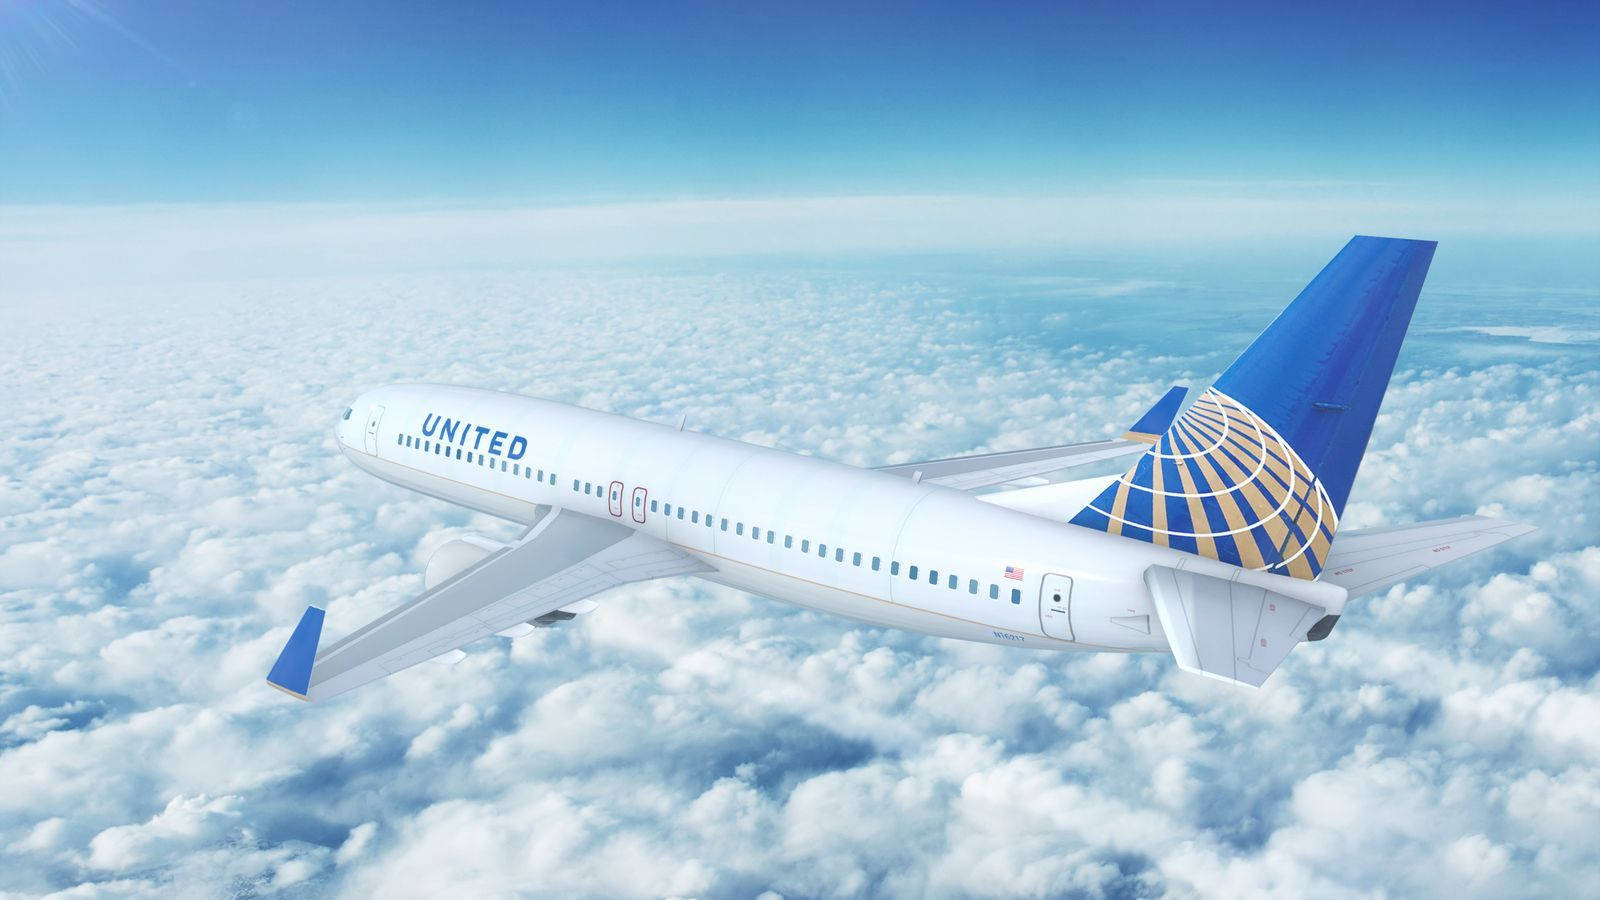 United White Plane Flying On Top Of Cloudy Sky Wallpaper